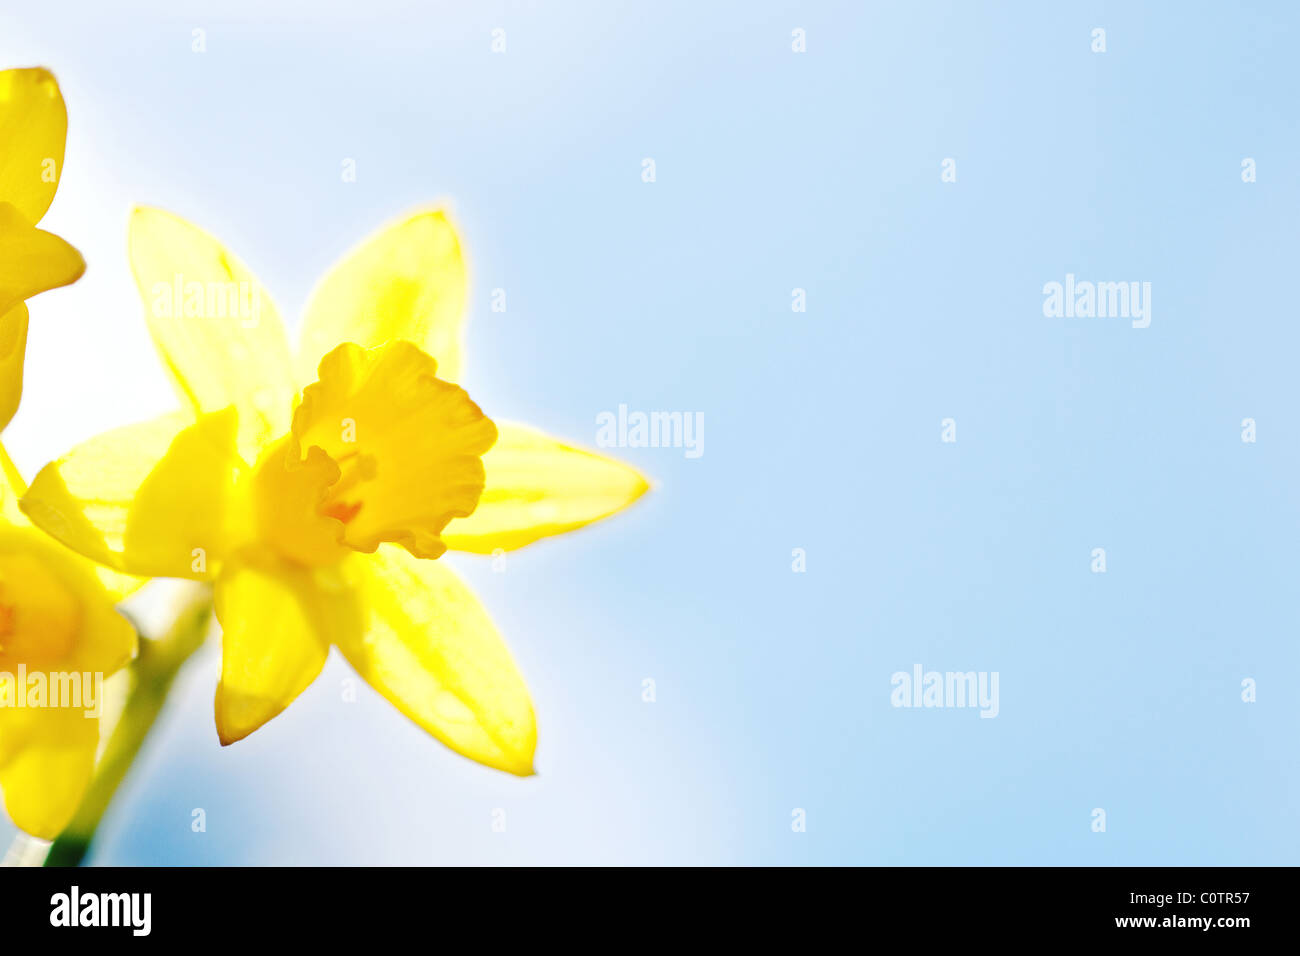 Yellow spring Daffodils, close-up shot taken outdoors in February with blue sky. Stock Photo